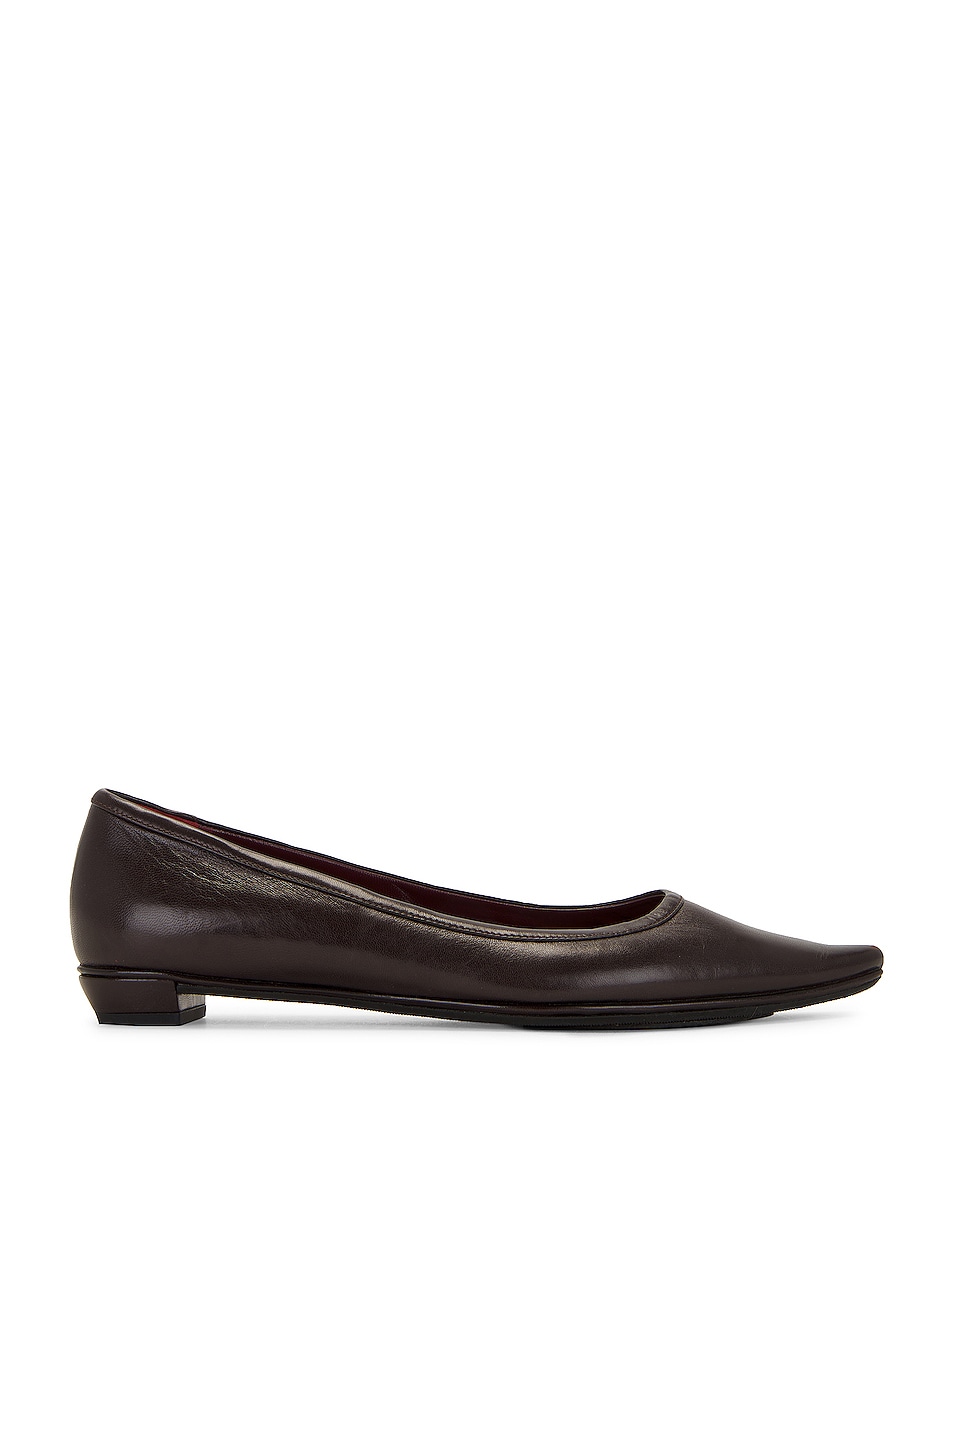 Image 1 of The Row Claudette Flat in Chocolate